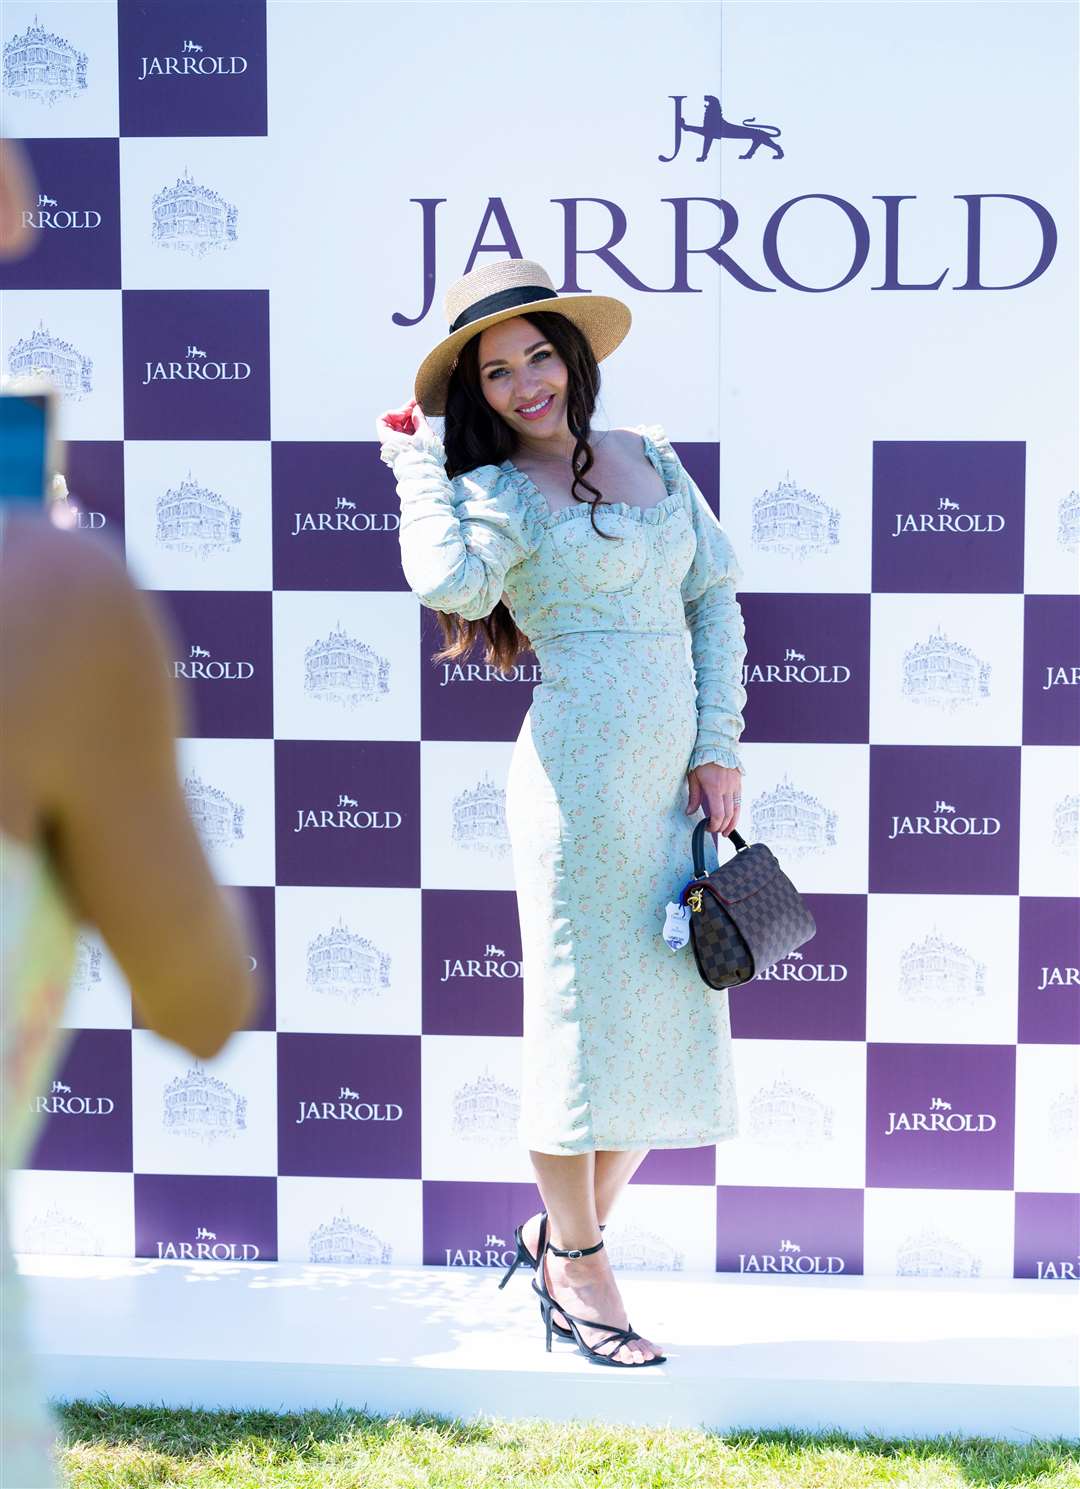 The event was sponsored by Jarrold. Picture: Ian Burt